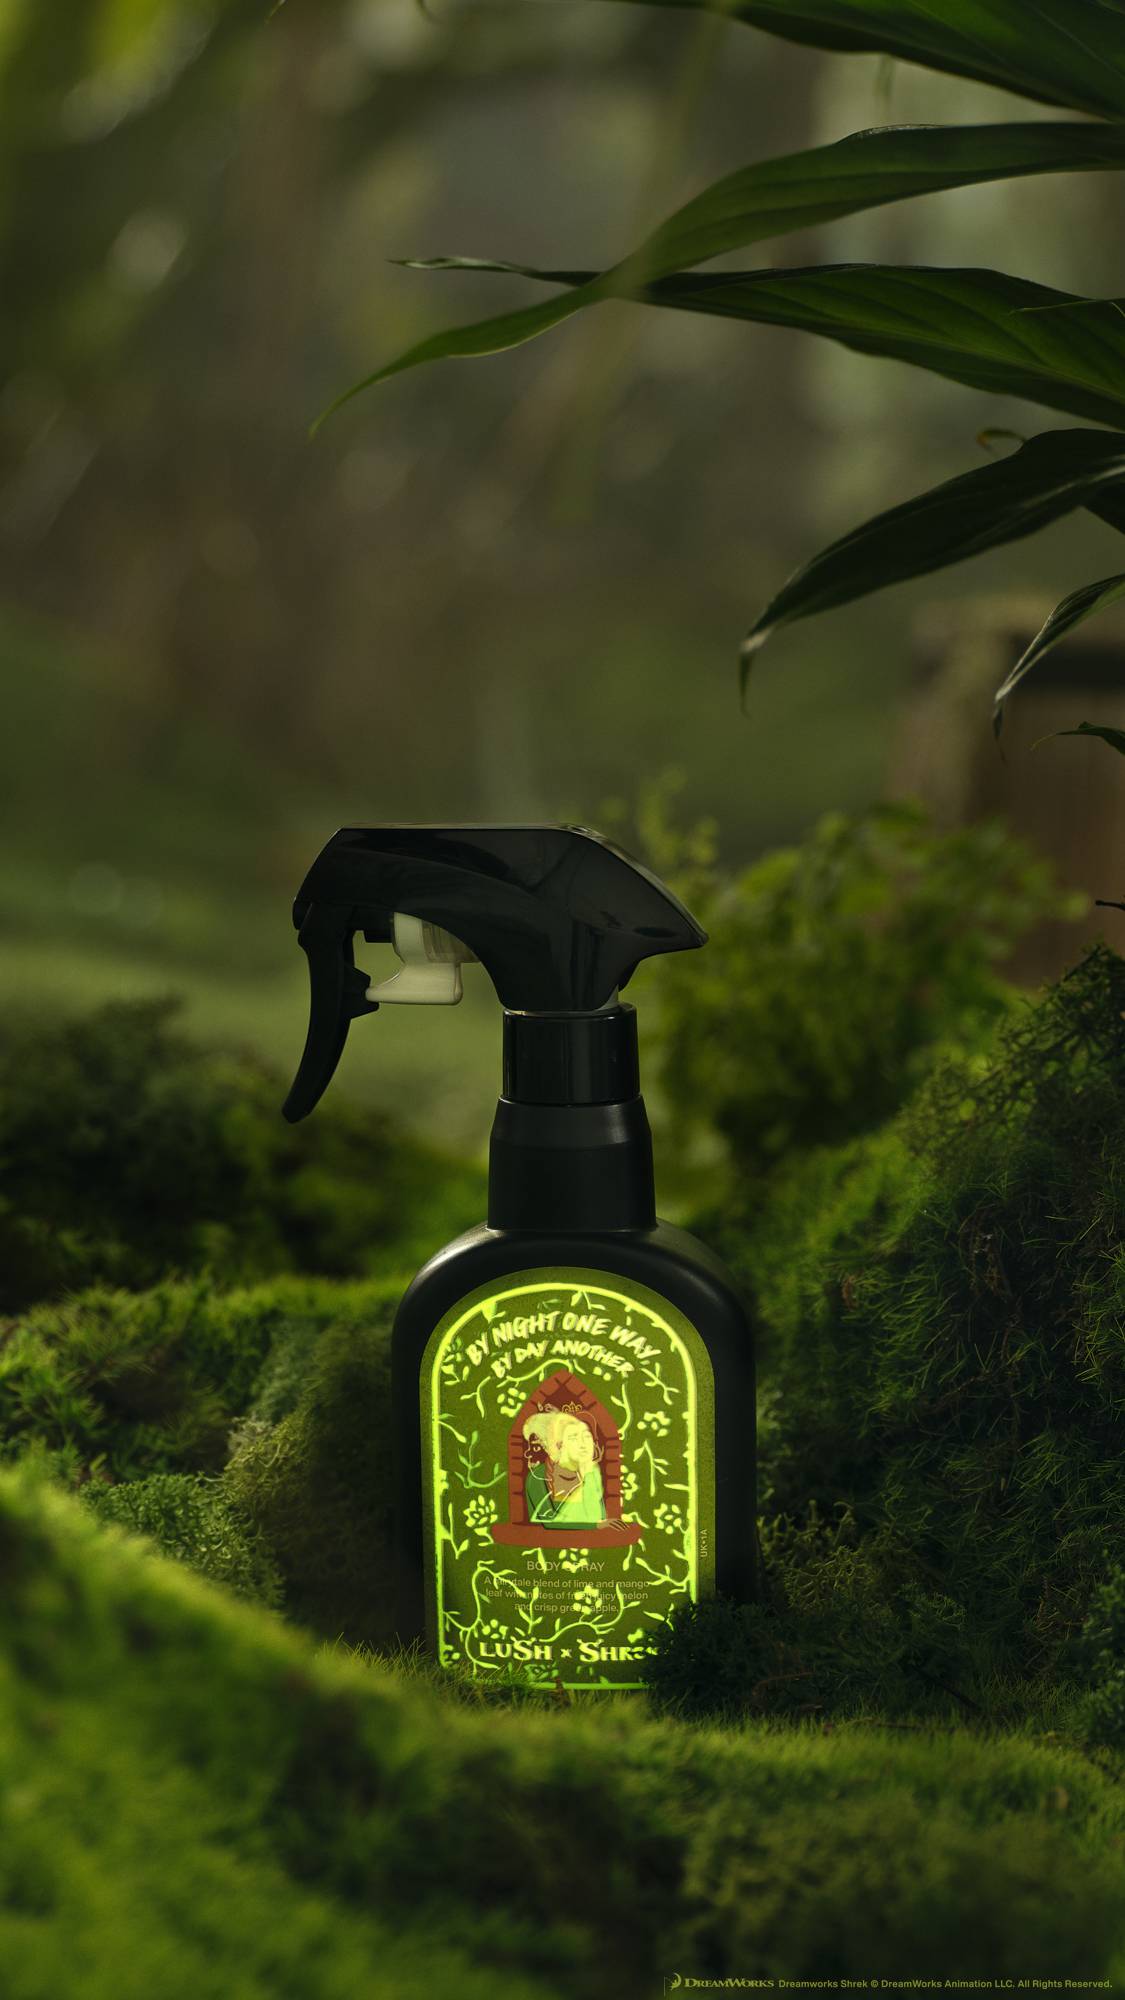 The body spray bottle is sitting on a fluffy, mossy ground with leaves overhead. The label seems to be shifting revealing some glow-in-the-dark markings. 